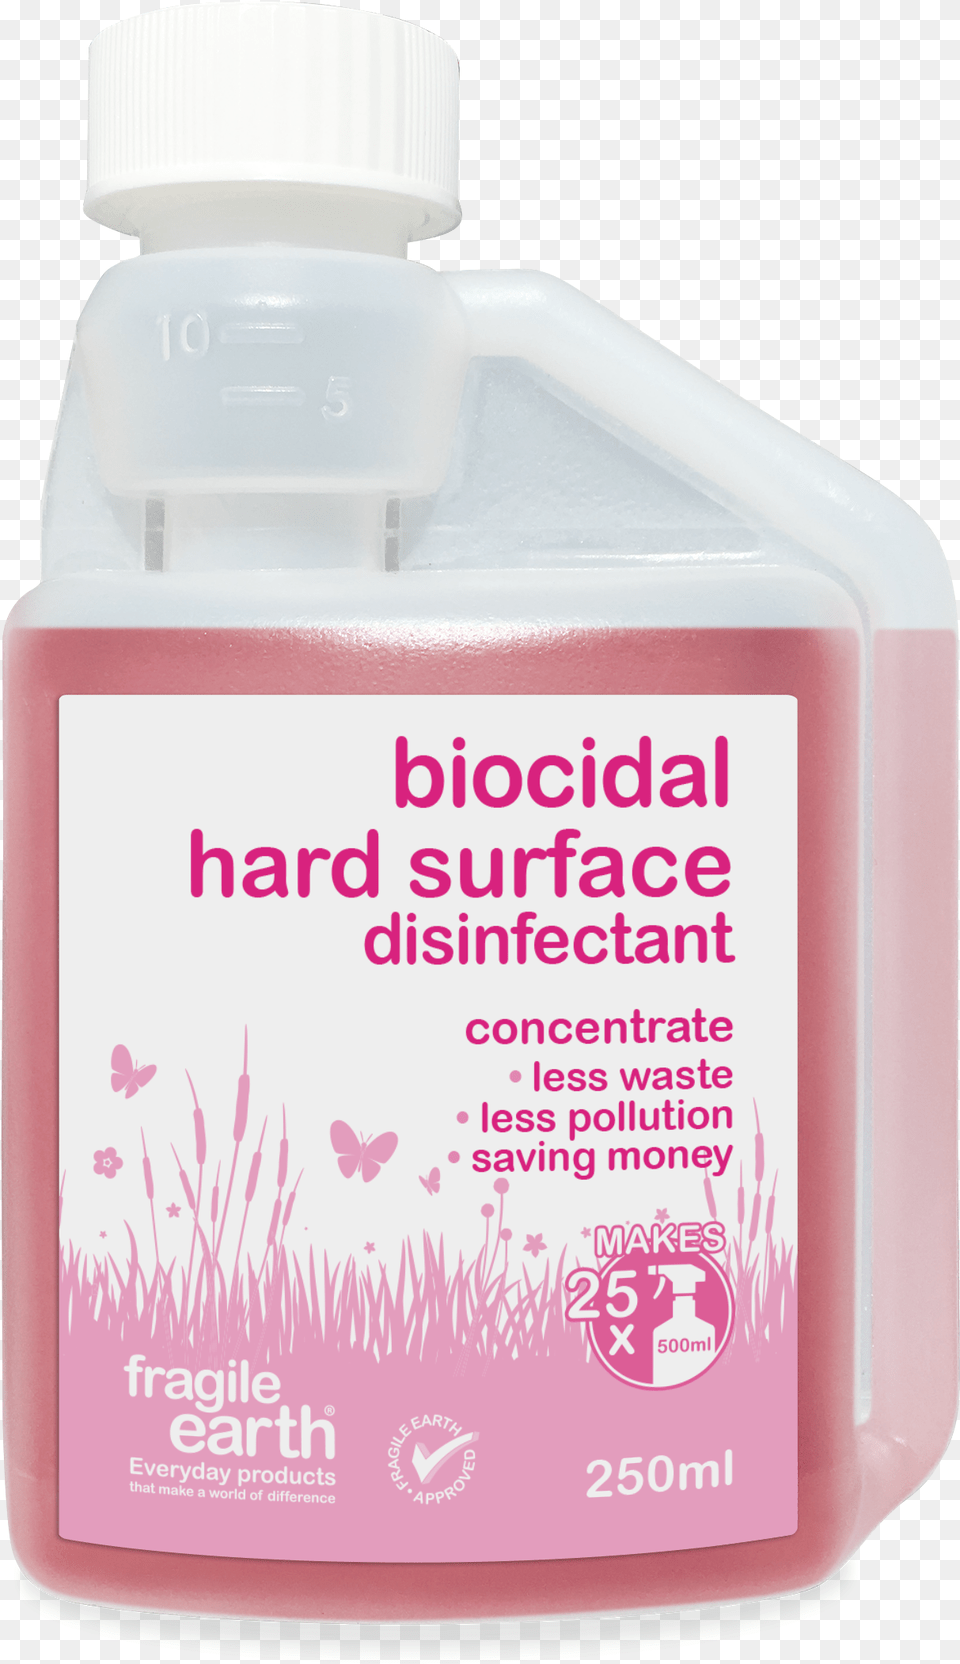 Fragile Earth Biocidal Hard Surface Disinfectant Cosmetics, Bottle, Lotion, Herbal, Herbs Png Image